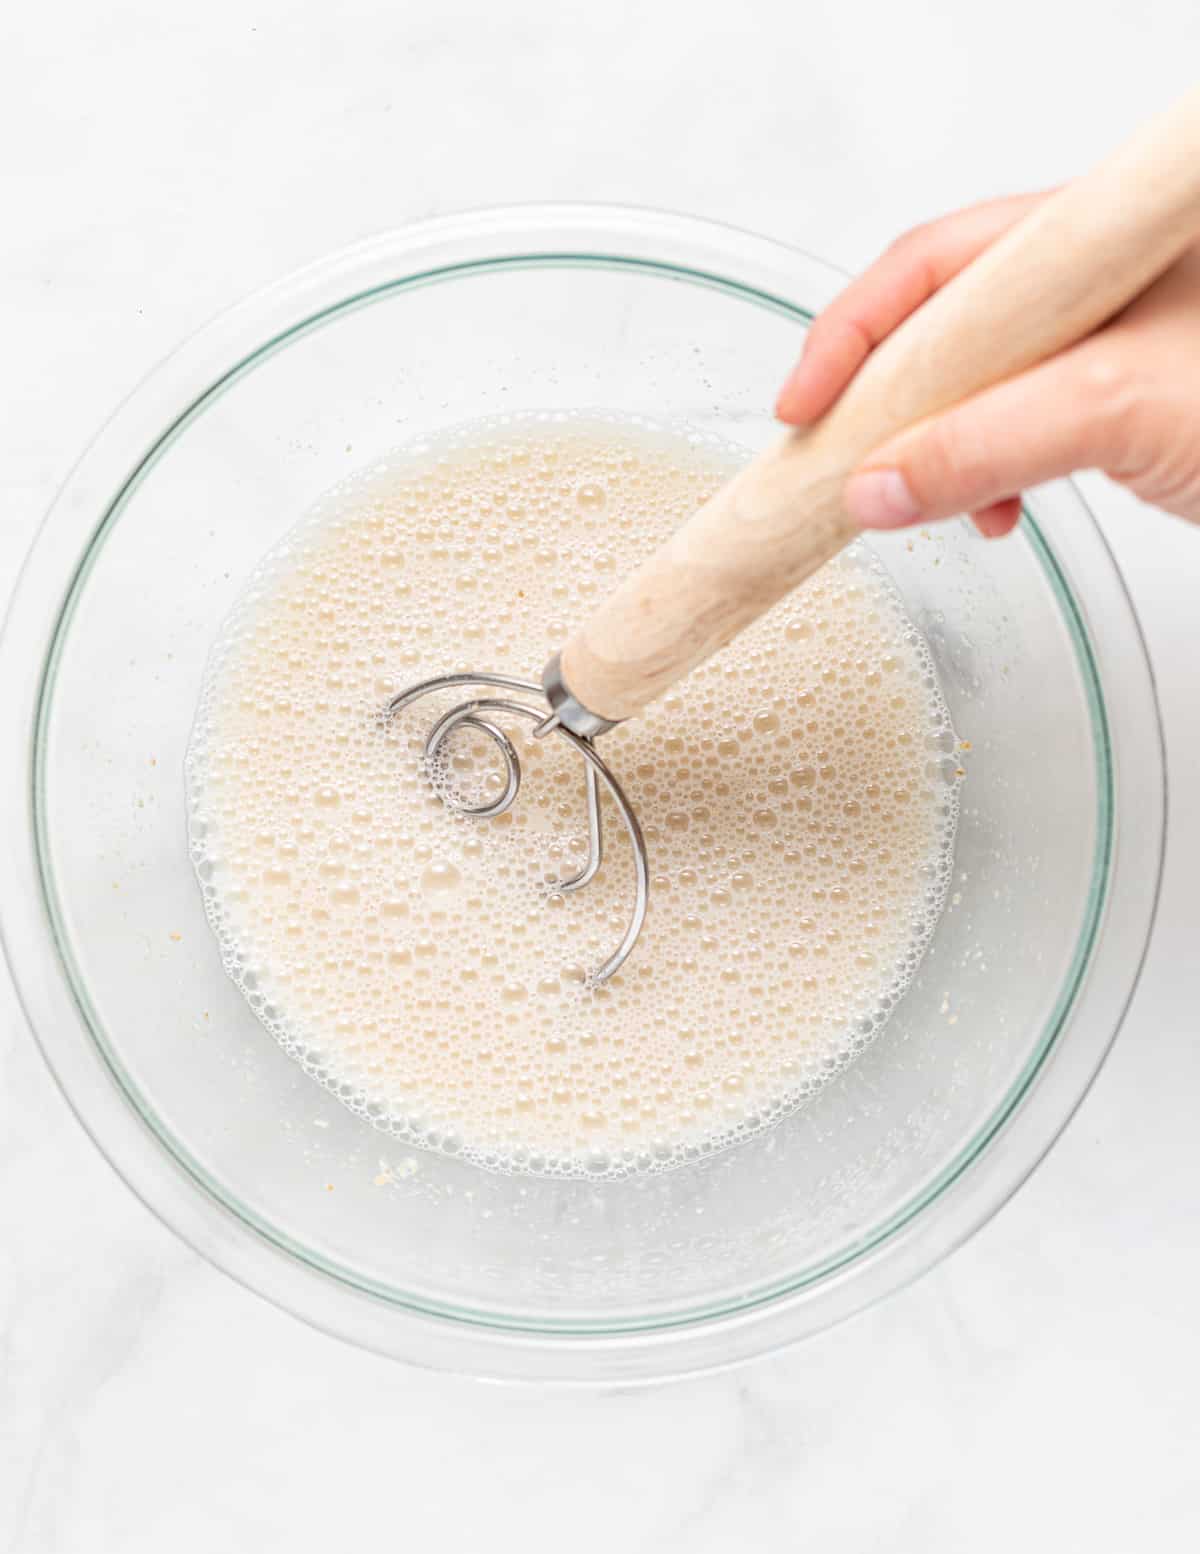 sourdough starter and water being whisked with a bread whisk